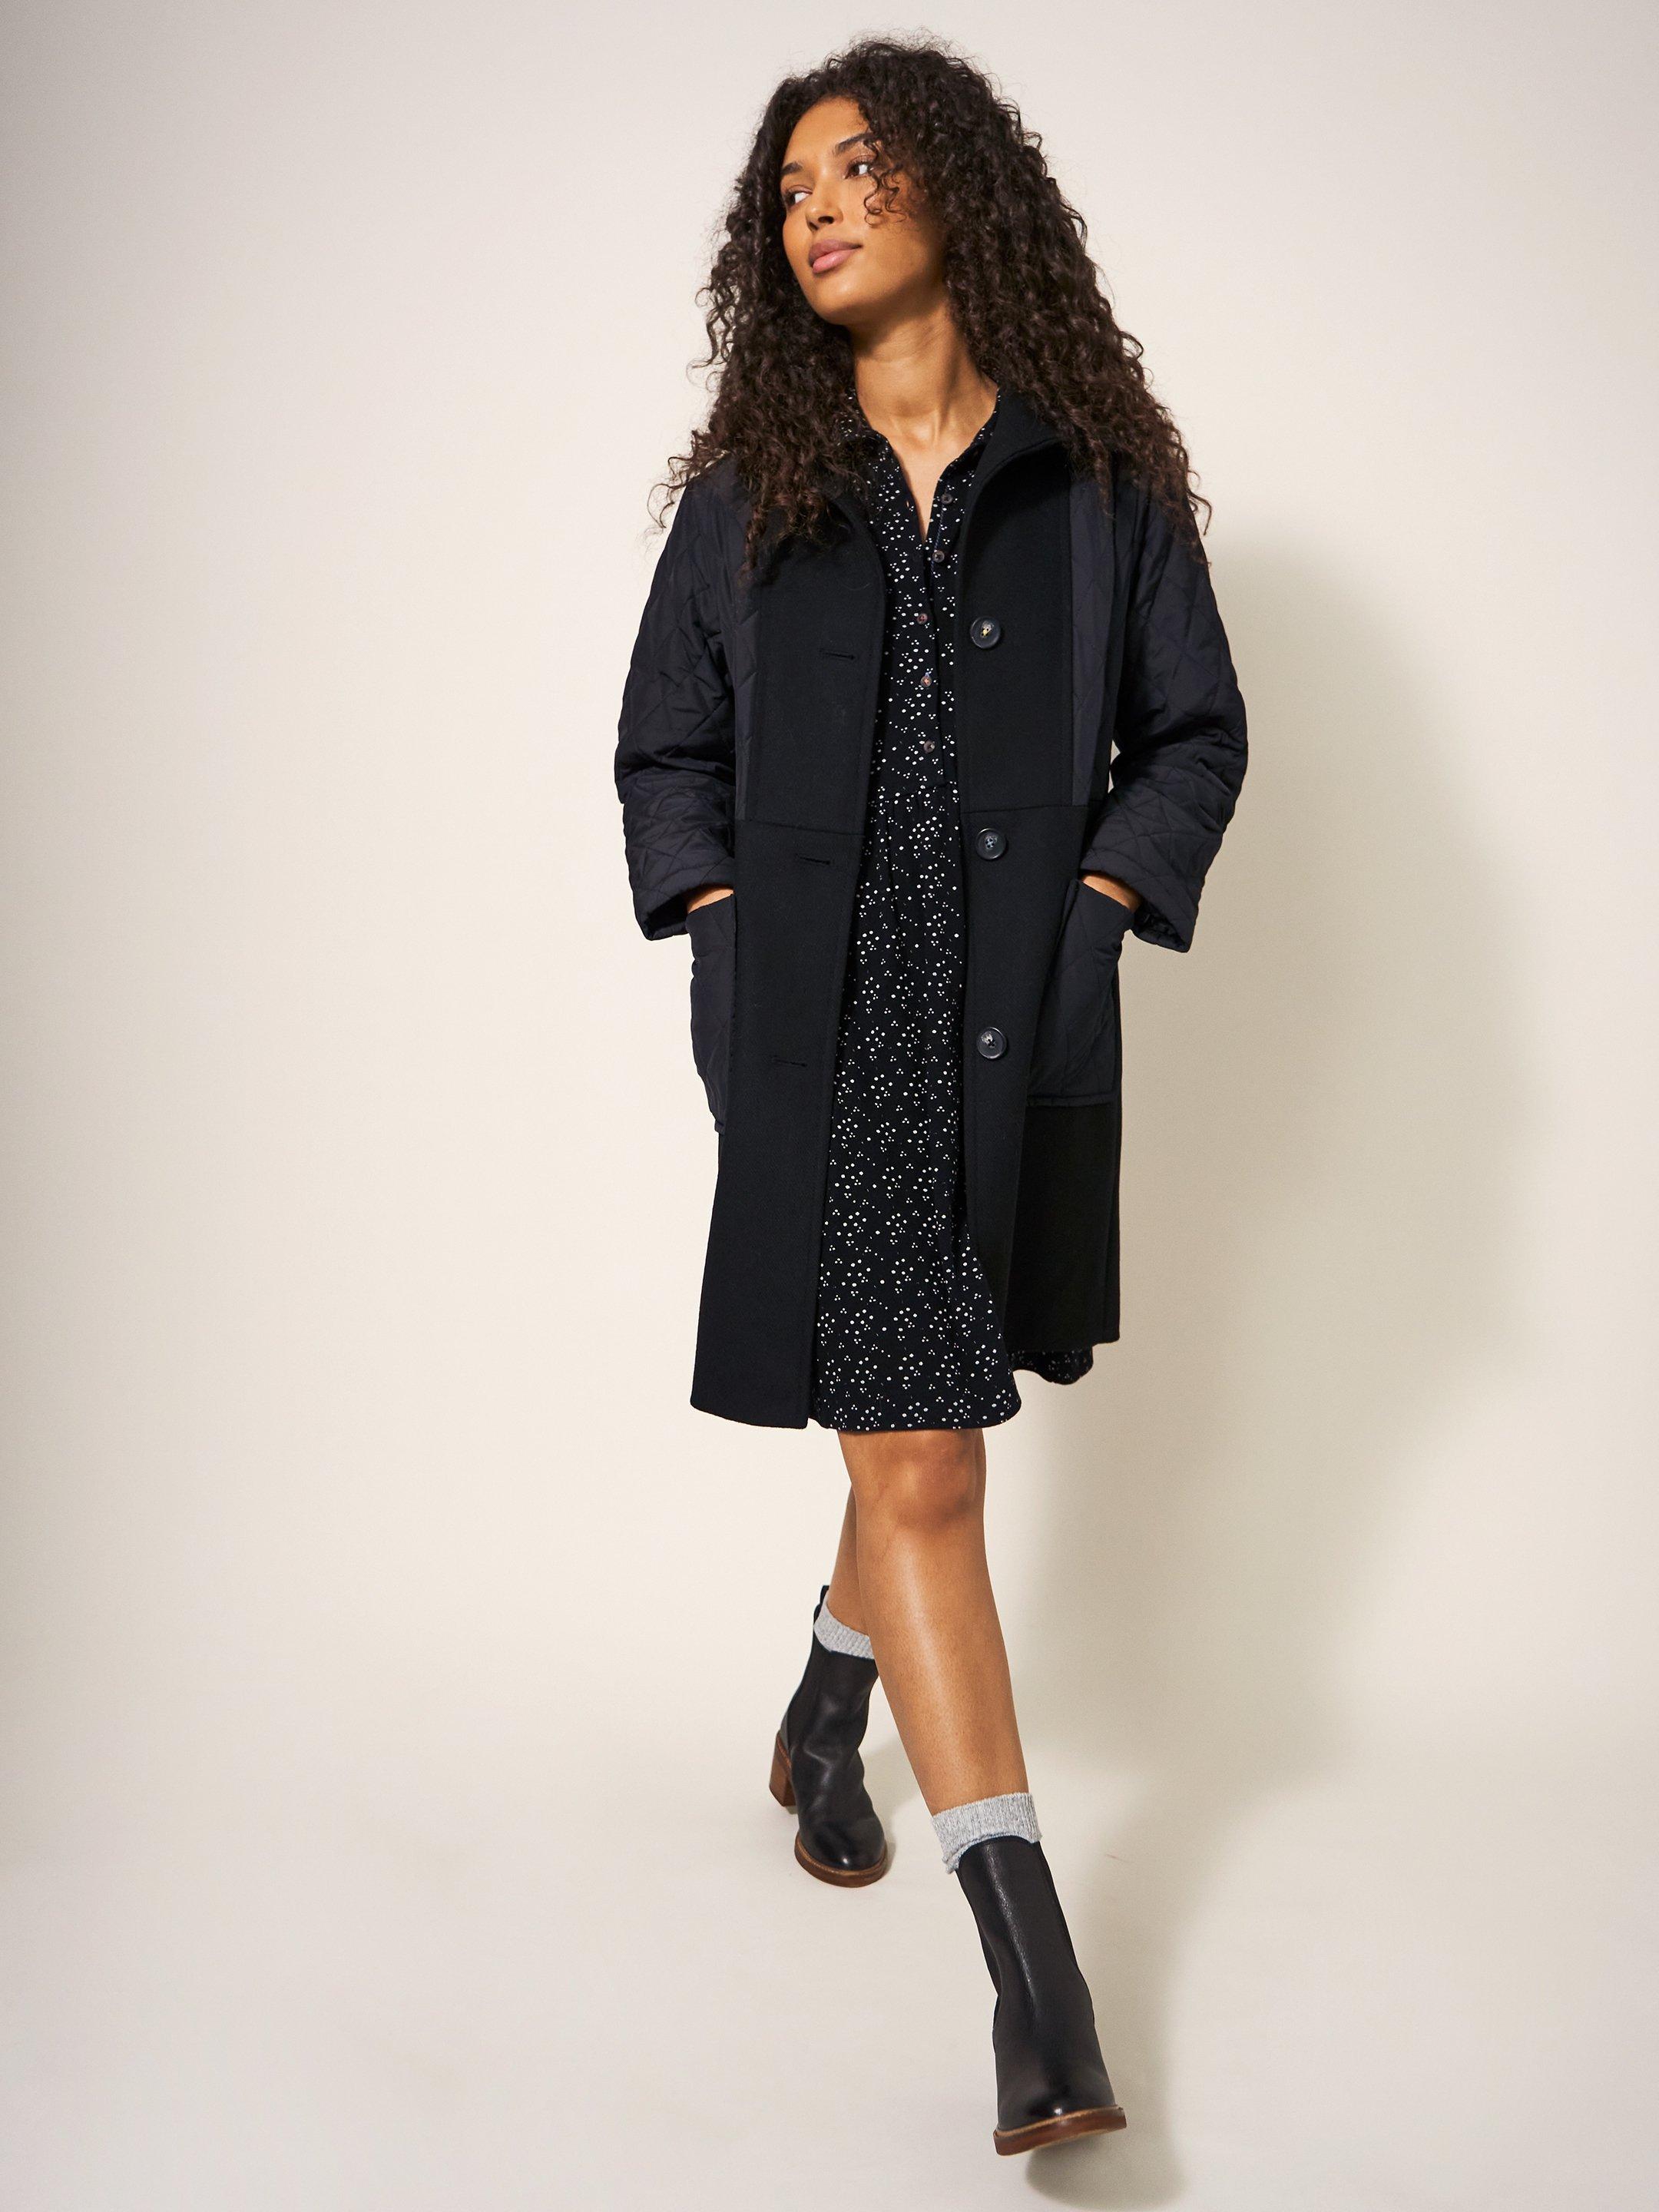 Karla Fabric Mix Coat in BLK MLT - LIFESTYLE